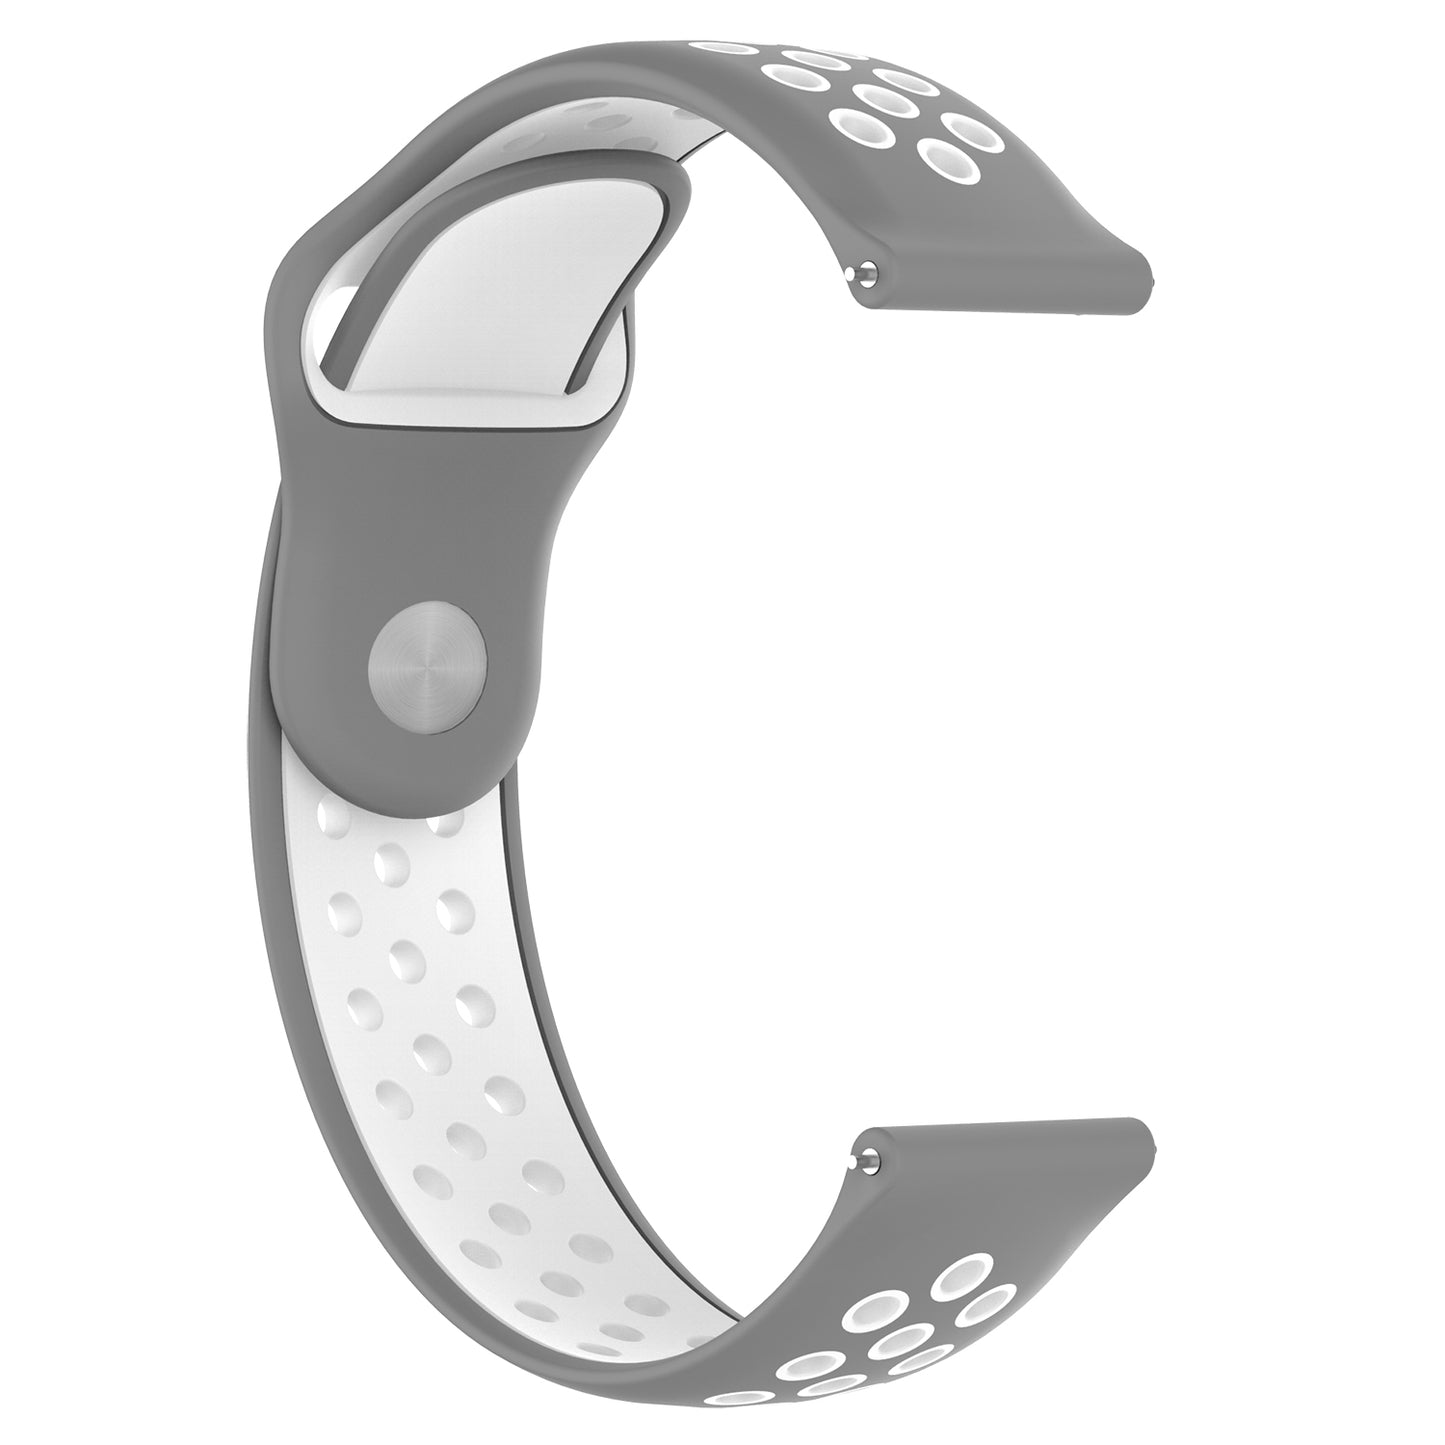 Perforated Rubber Strap for Fossil Gen 5 Smartwatch